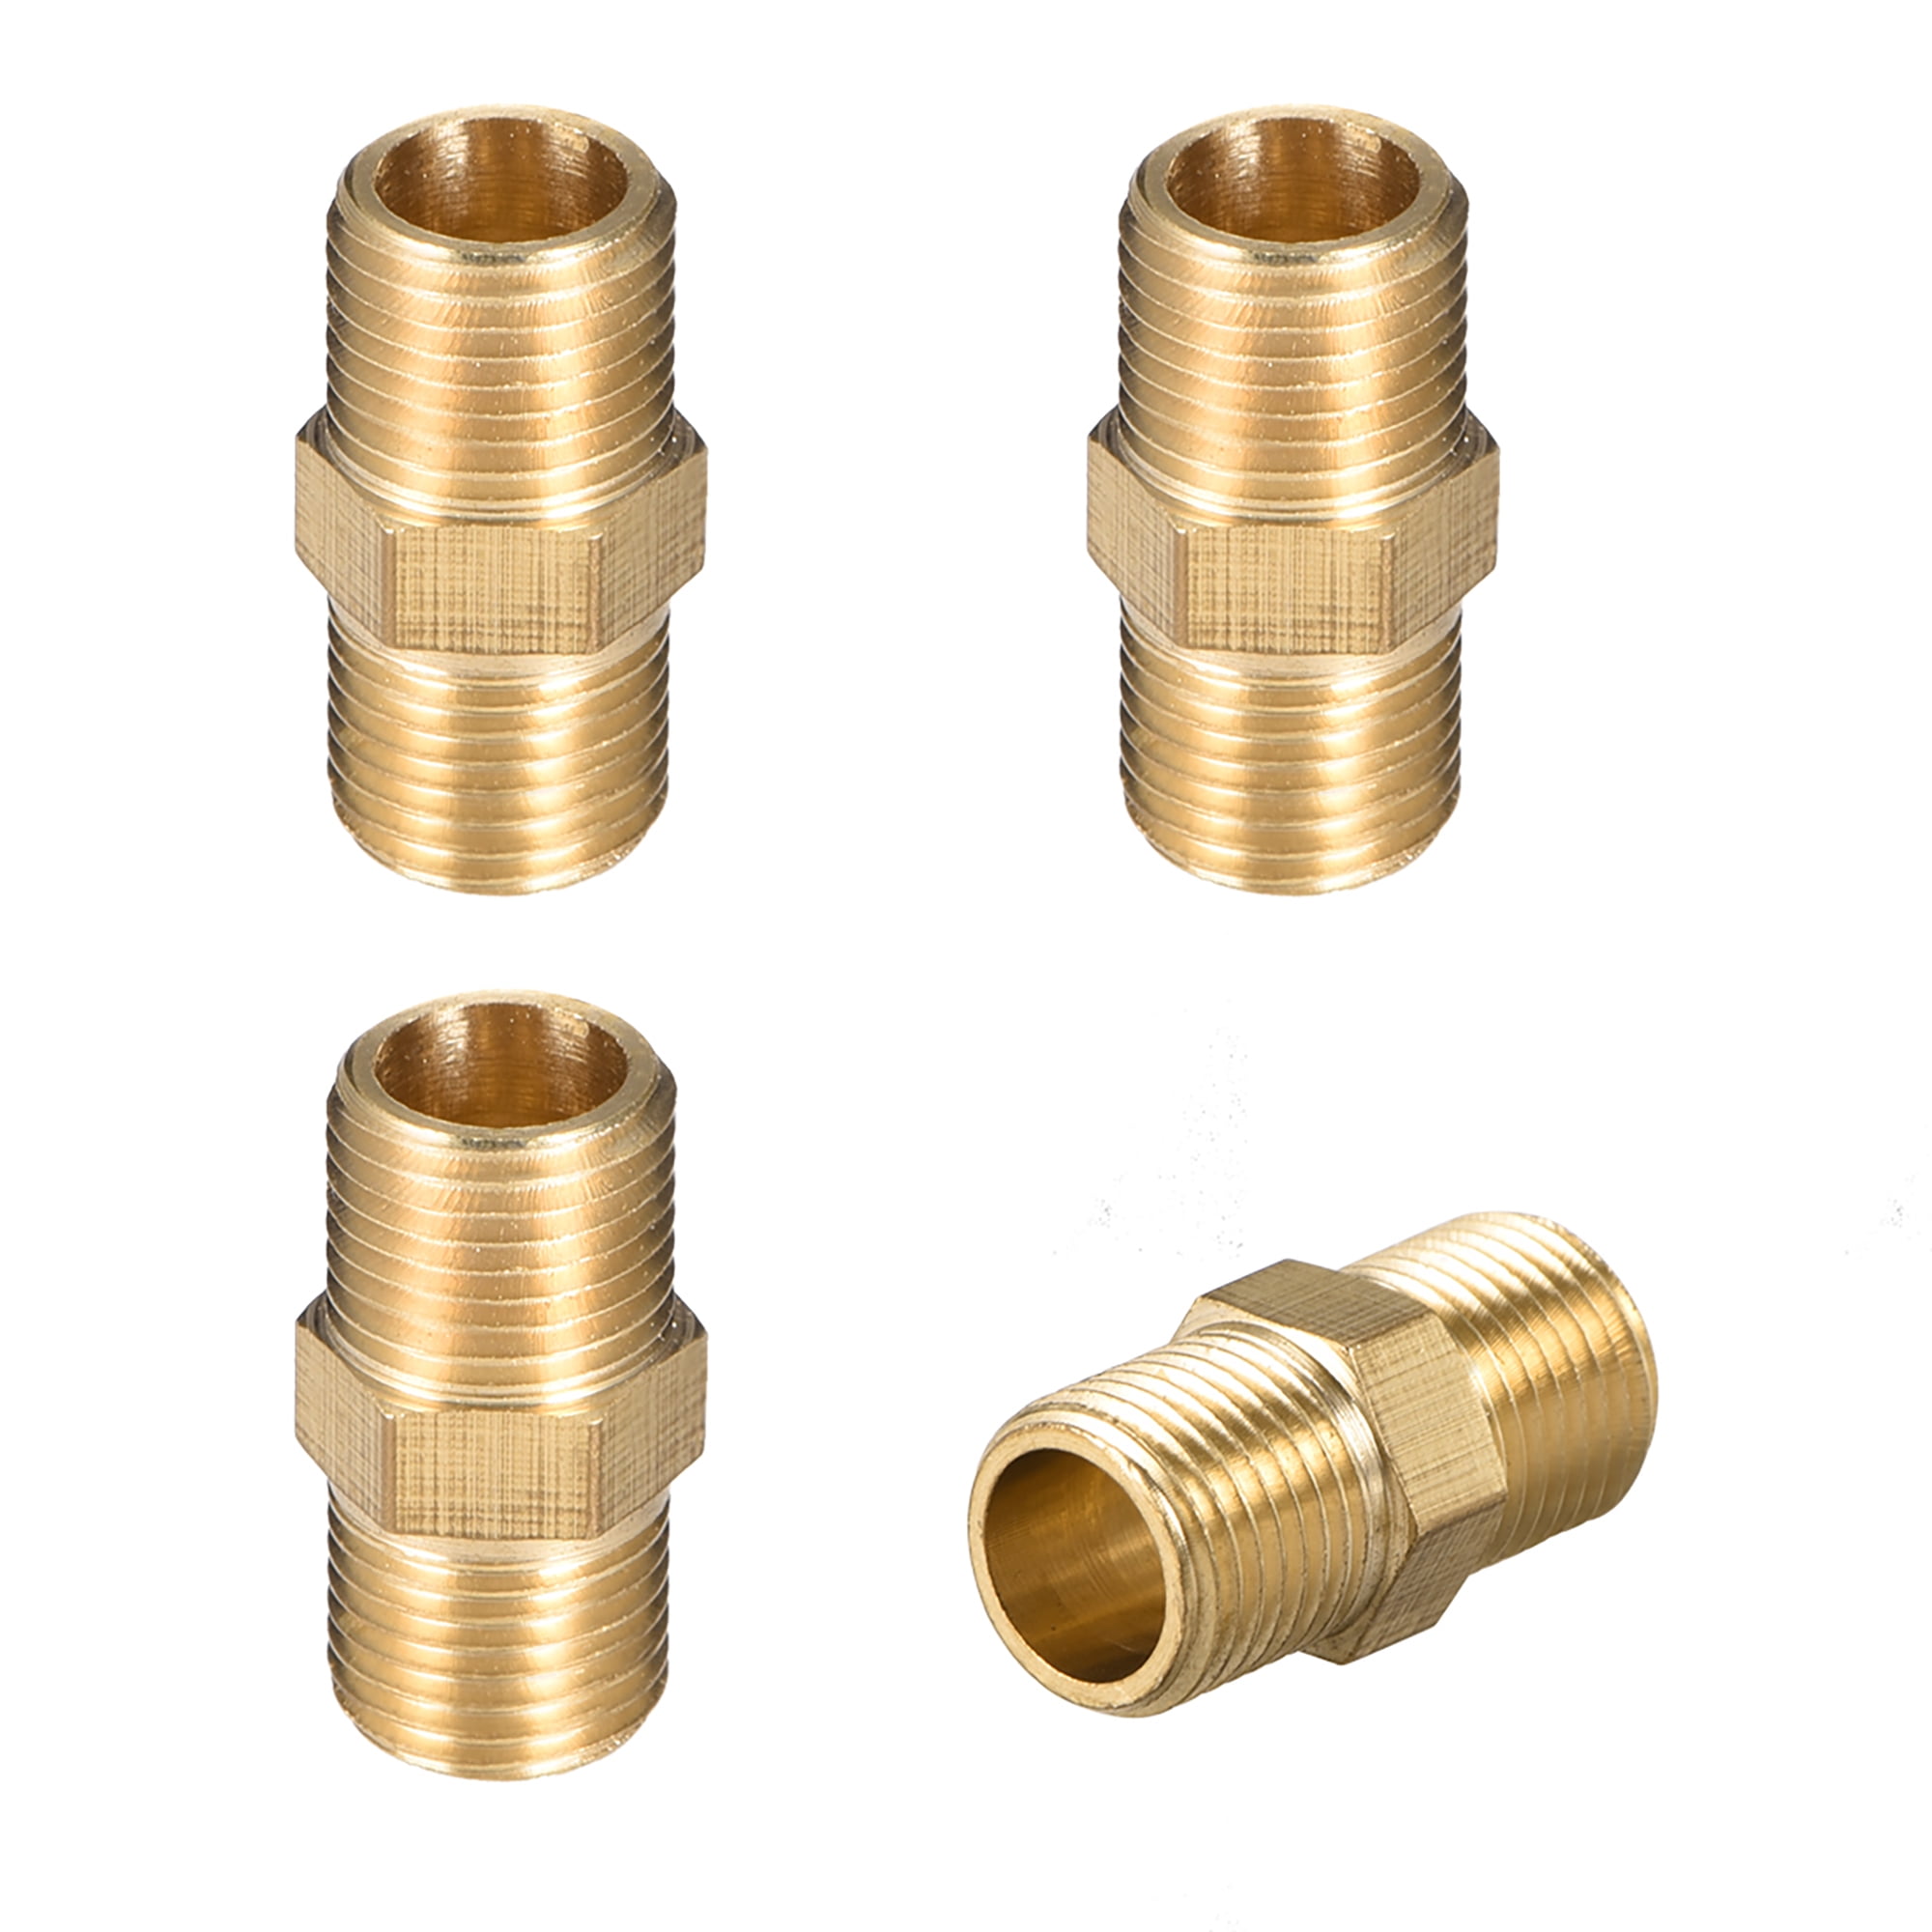 Brass Pipe Fitting Hex Nipple, 1/8 x 1/8 G Male Pipe Brass Fitting 4pcs